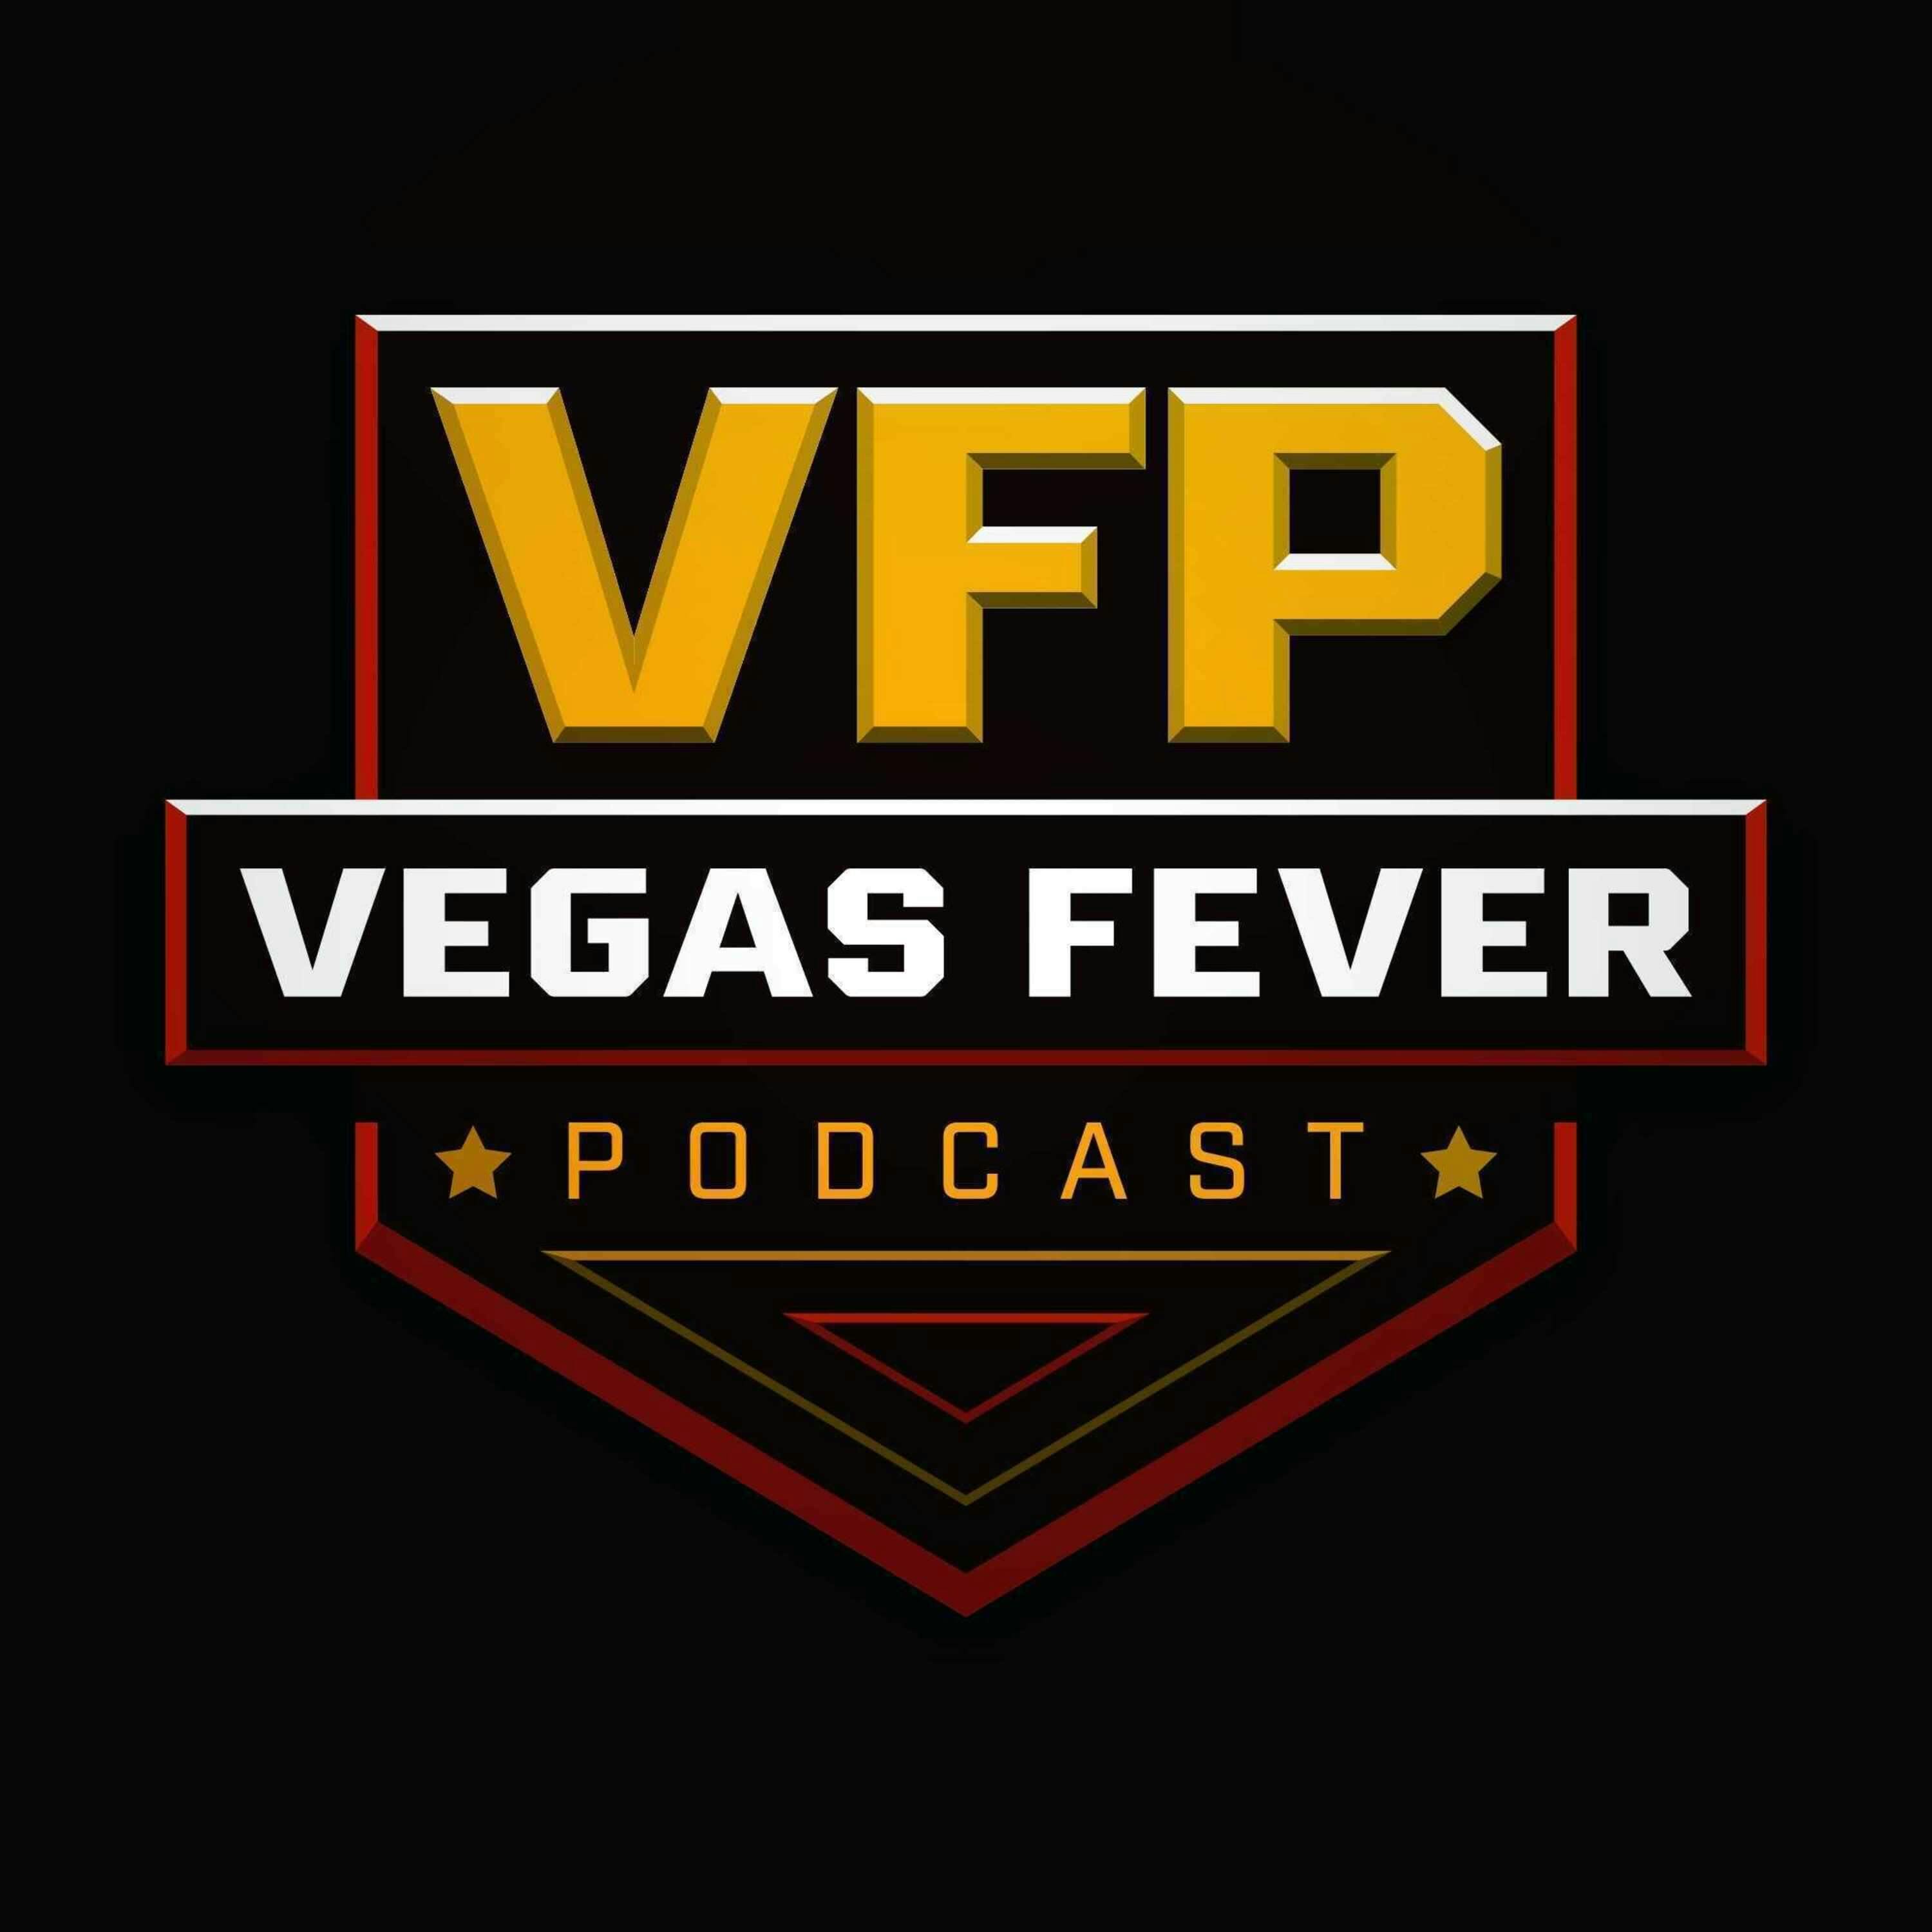 Episode 16 - UNLV has 8 players exit, adds 2 others plus a very good assistant,while VGK struggles.